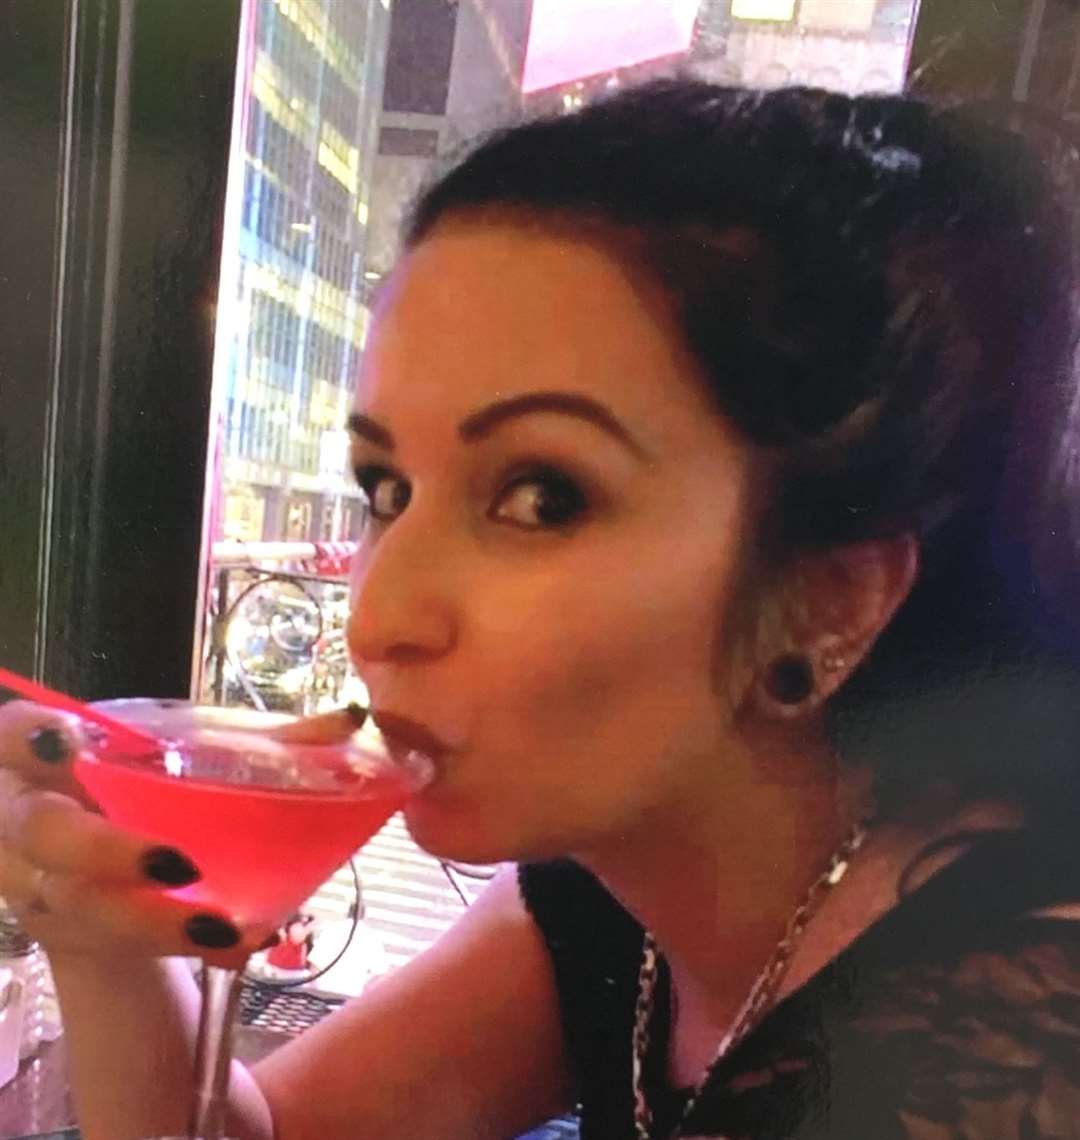 Ramona Stoia, 35, died in the GothInk tattoo parlour in Canterbury